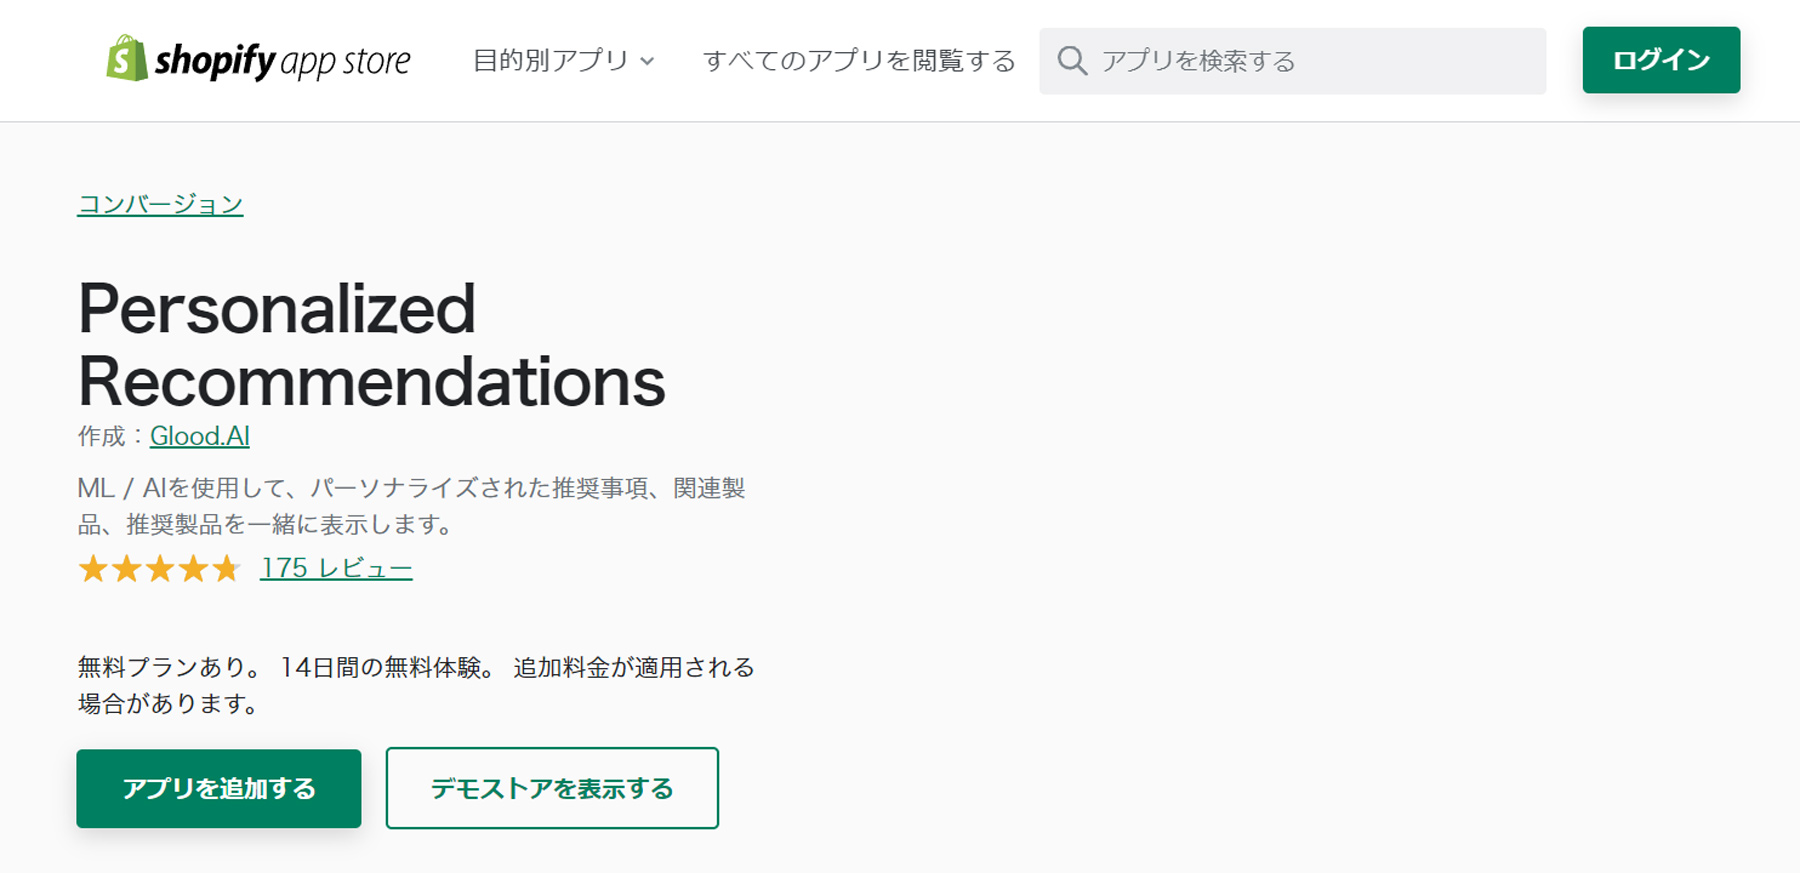 Personalized Recommendations公式Webサイト